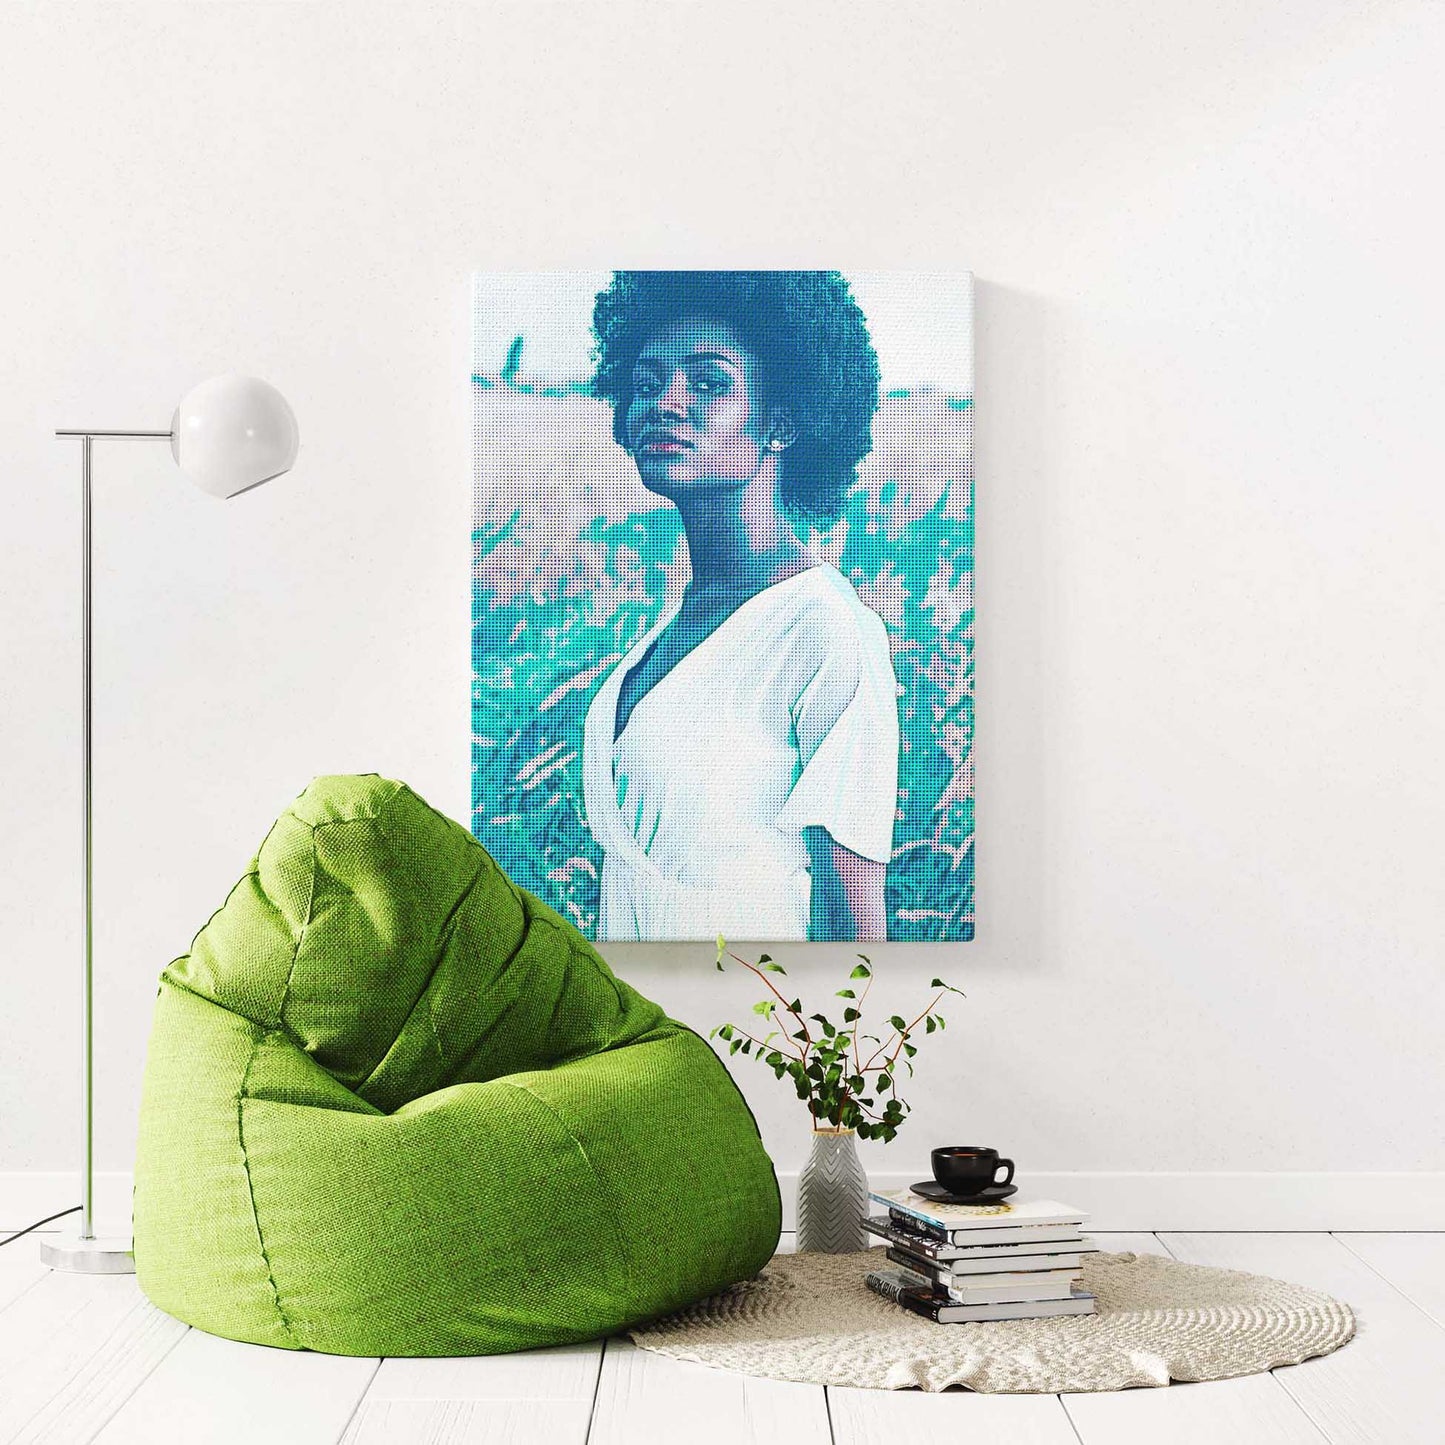 Infuse your space with a cool and trendy vibe with our Personalised Green Grunge Canvas. This handmade artwork transforms your favorite photo into a vibrant and unique piece of wall decor. Whether as a gift or for your own home